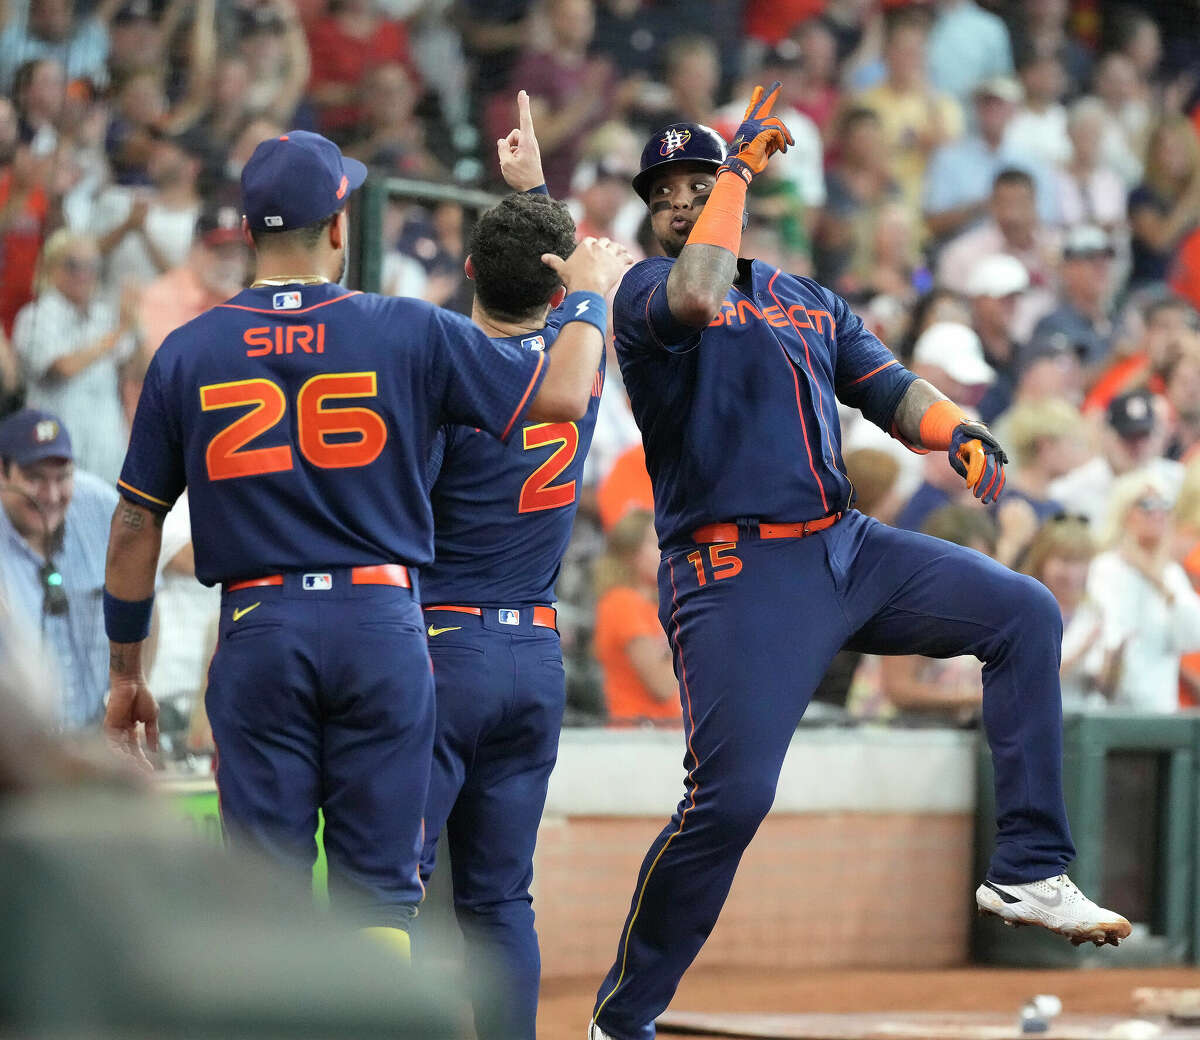 Houston Astros' Martin Maldonado (15) celebrates with Alex Bregman (2) and Jose Siri (26) after hitting a grand slam off of Oakland Athletics starting pitcher Jared Koenig (46) during the second inning of a MLB baseball game at Minute Maid Park on Saturday, July 16, 2022 in Houston.